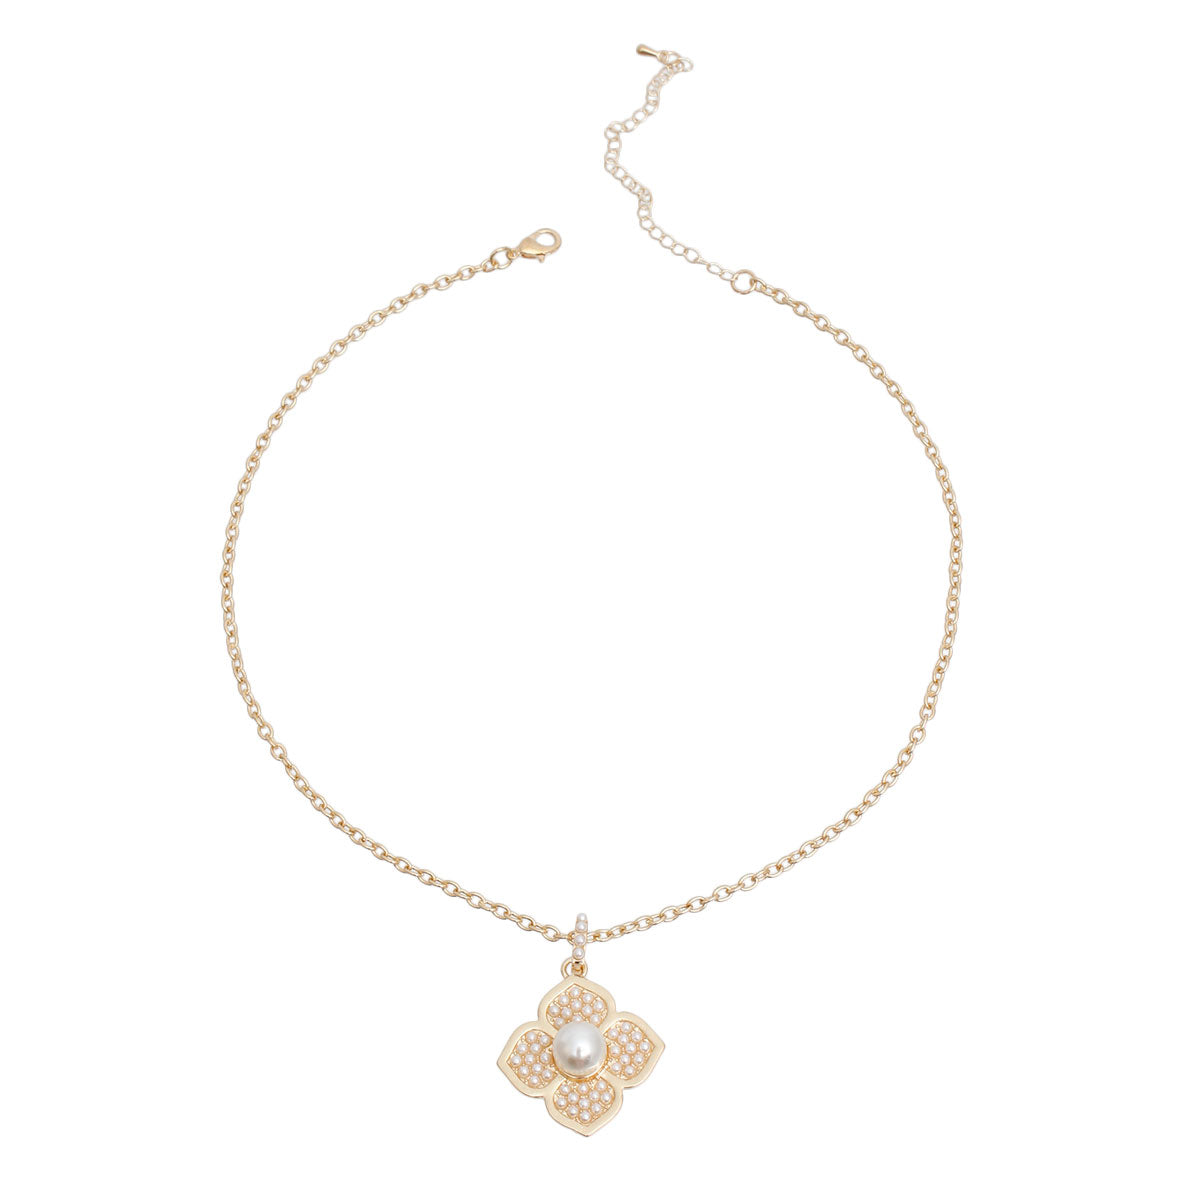 Pearl Luxury French Designer Flower Necklace